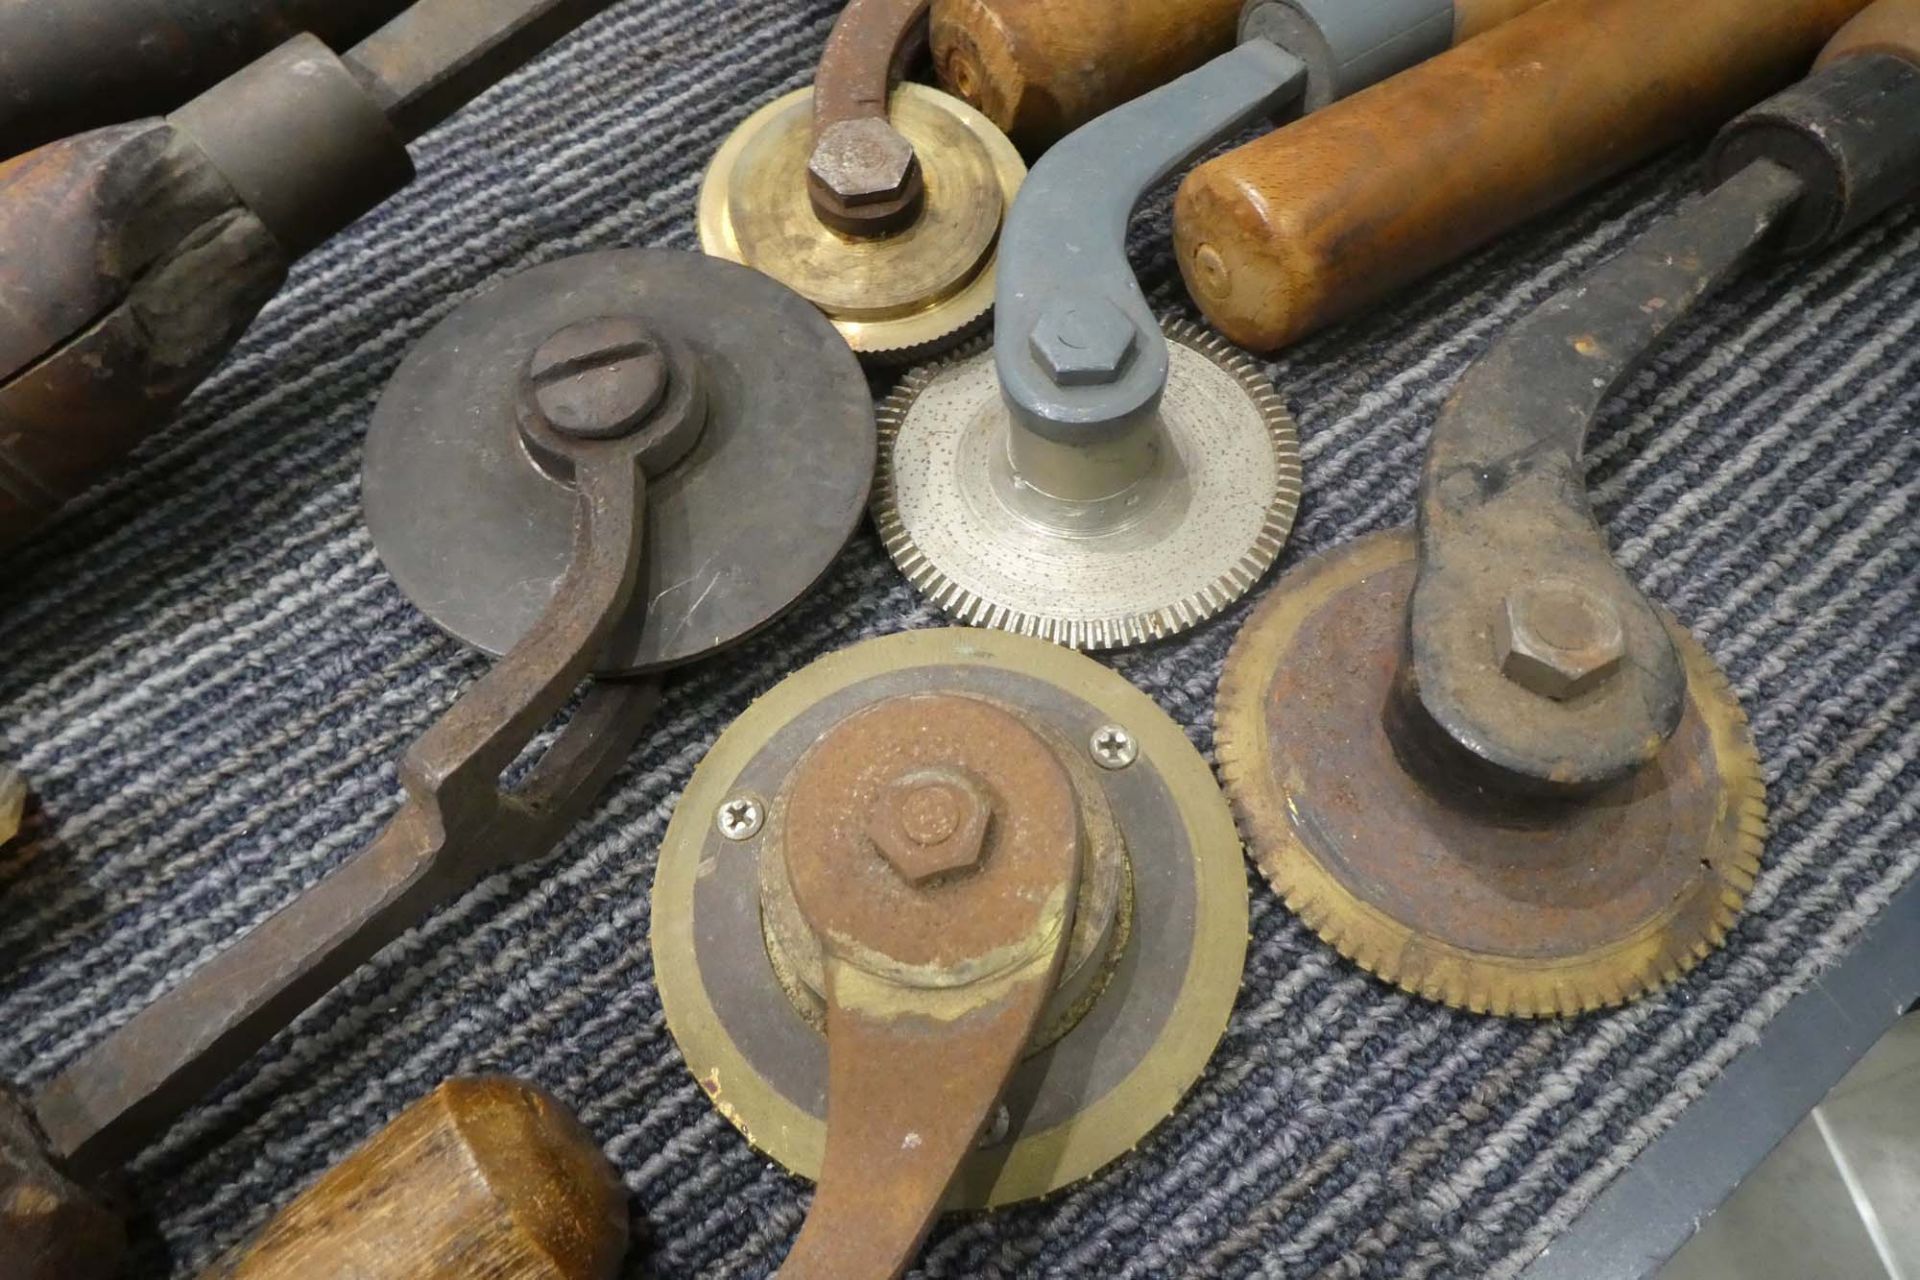 A collection of wooden handled plain and patterned roller knurling tools, blocks and hammer - Image 3 of 3